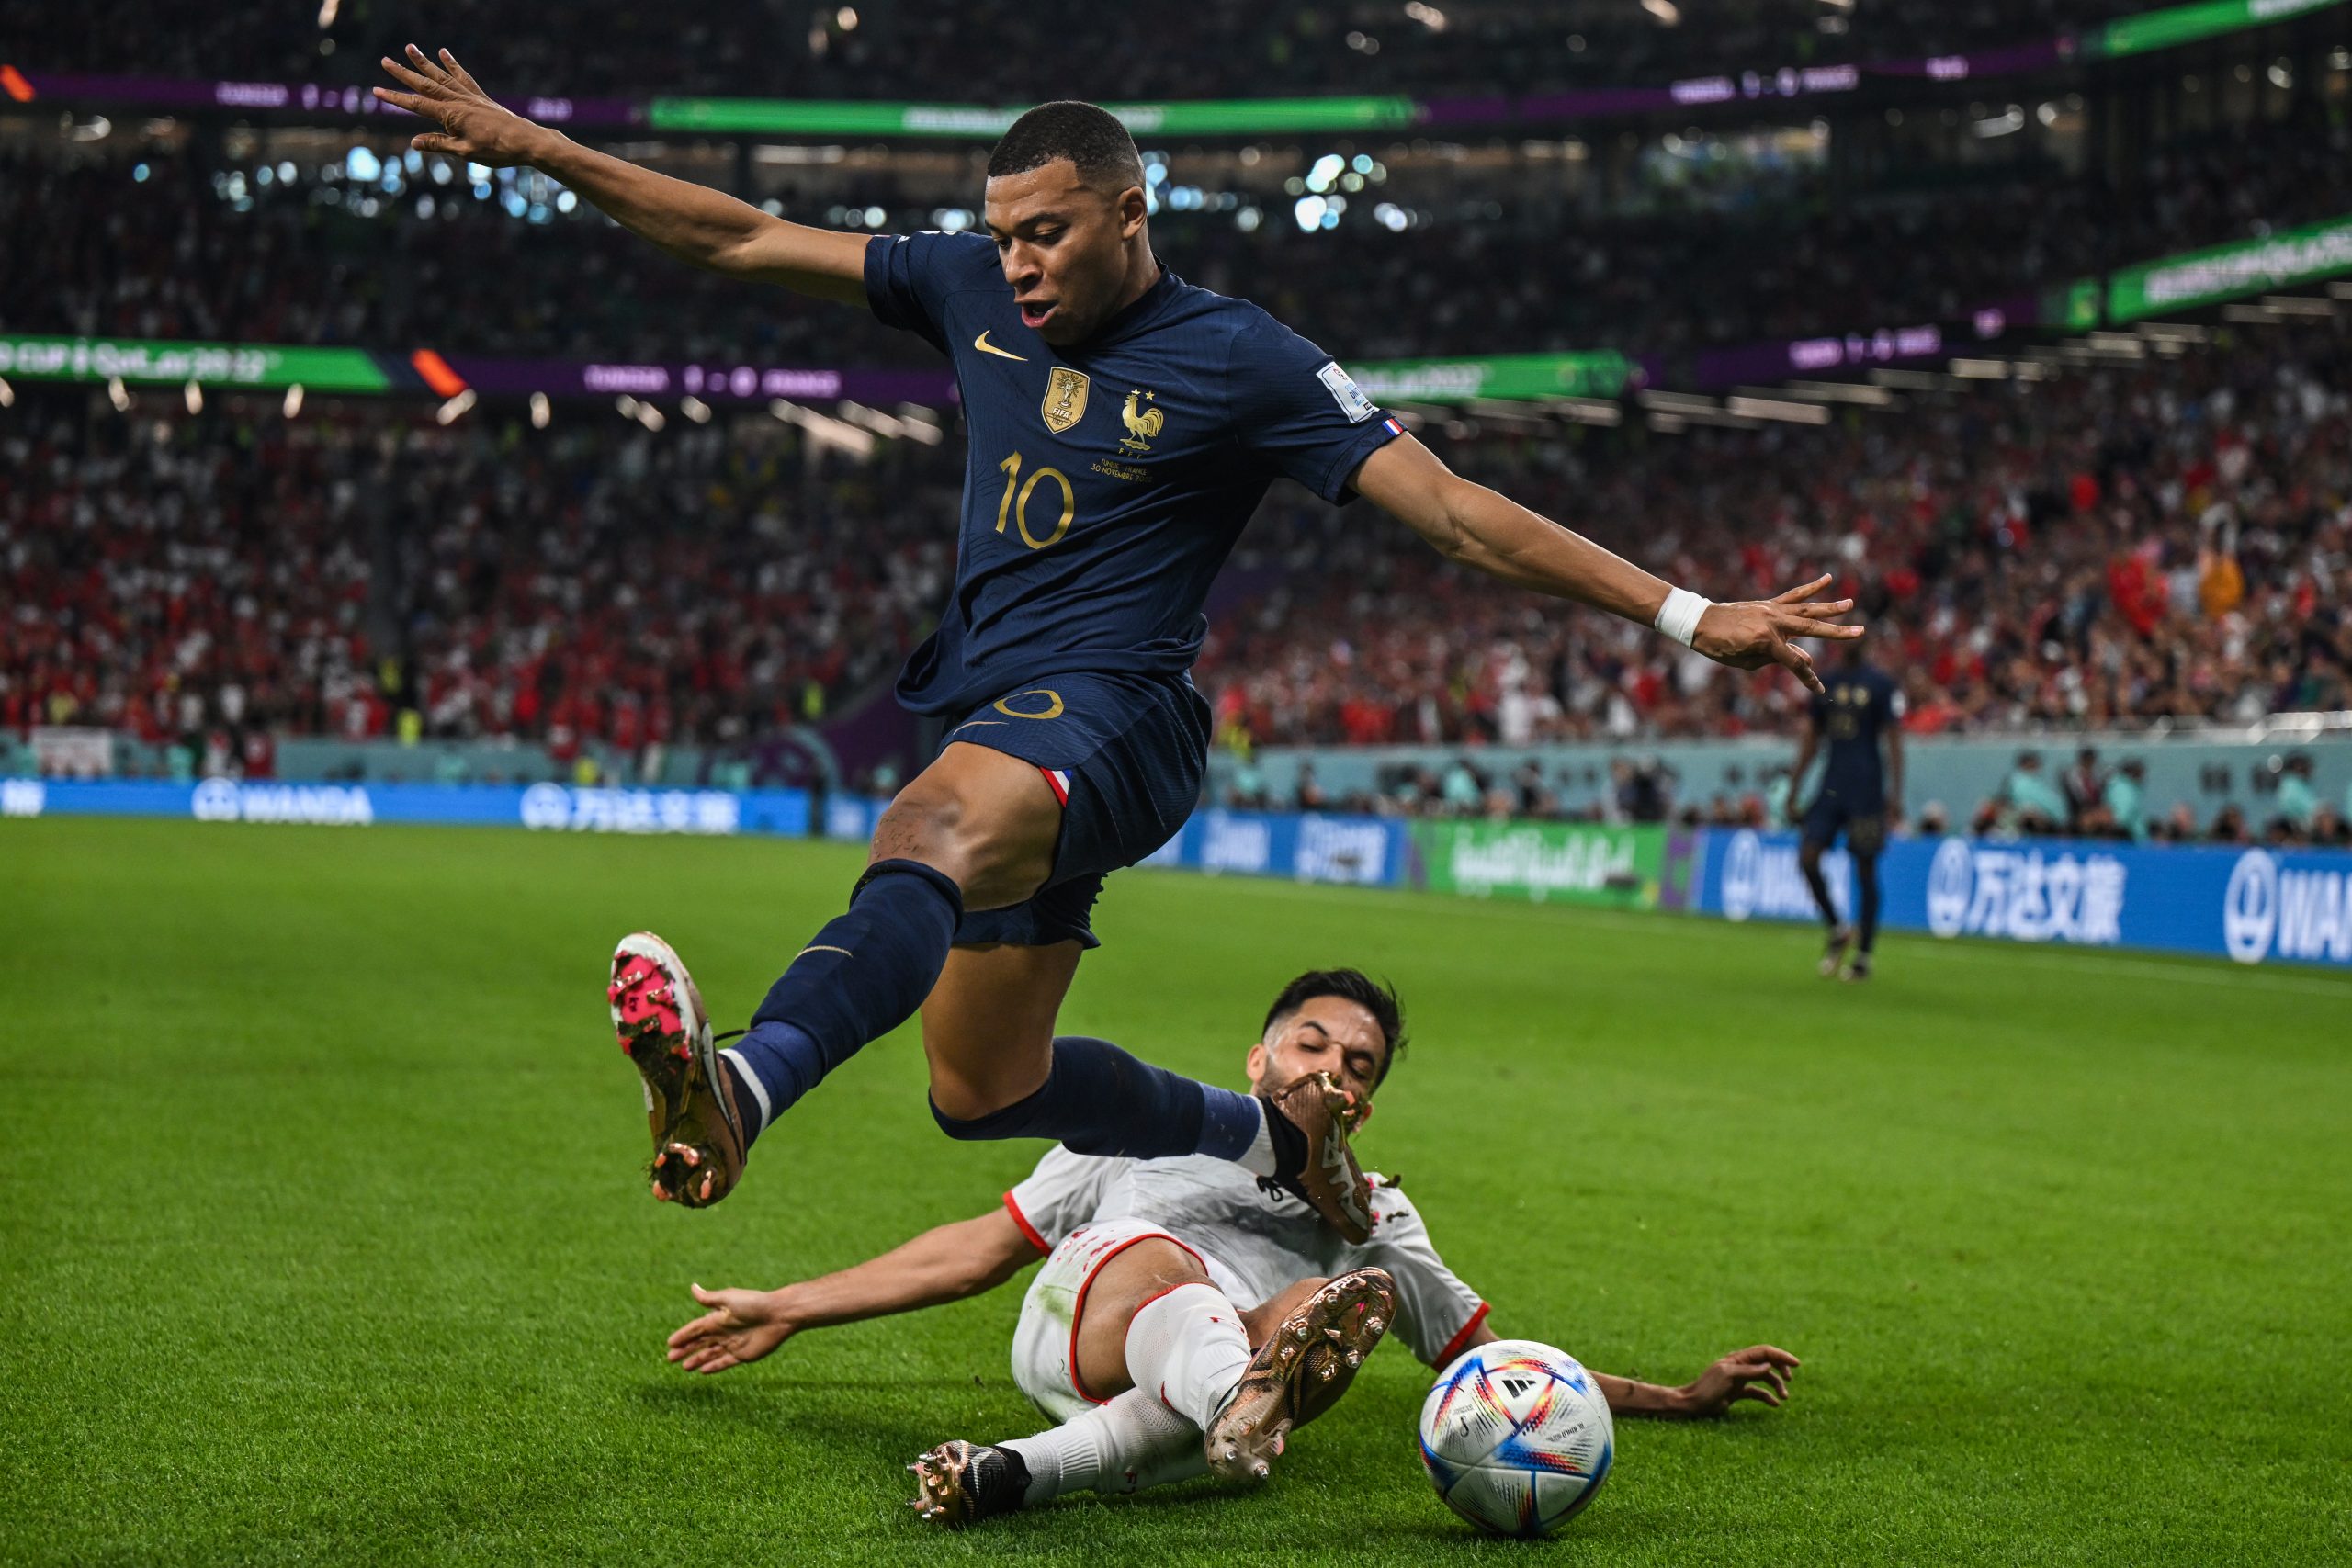 30 November 2022, Qatar, Al Rayyan: France's Kylian Mbappe (L) and Tunisia's Wajdi Kechrida battle for the ball during the FIFA World Cup Group D soccer match between Tunisia and France at the Education City Stadium. Photo: Robert Michael/dpa